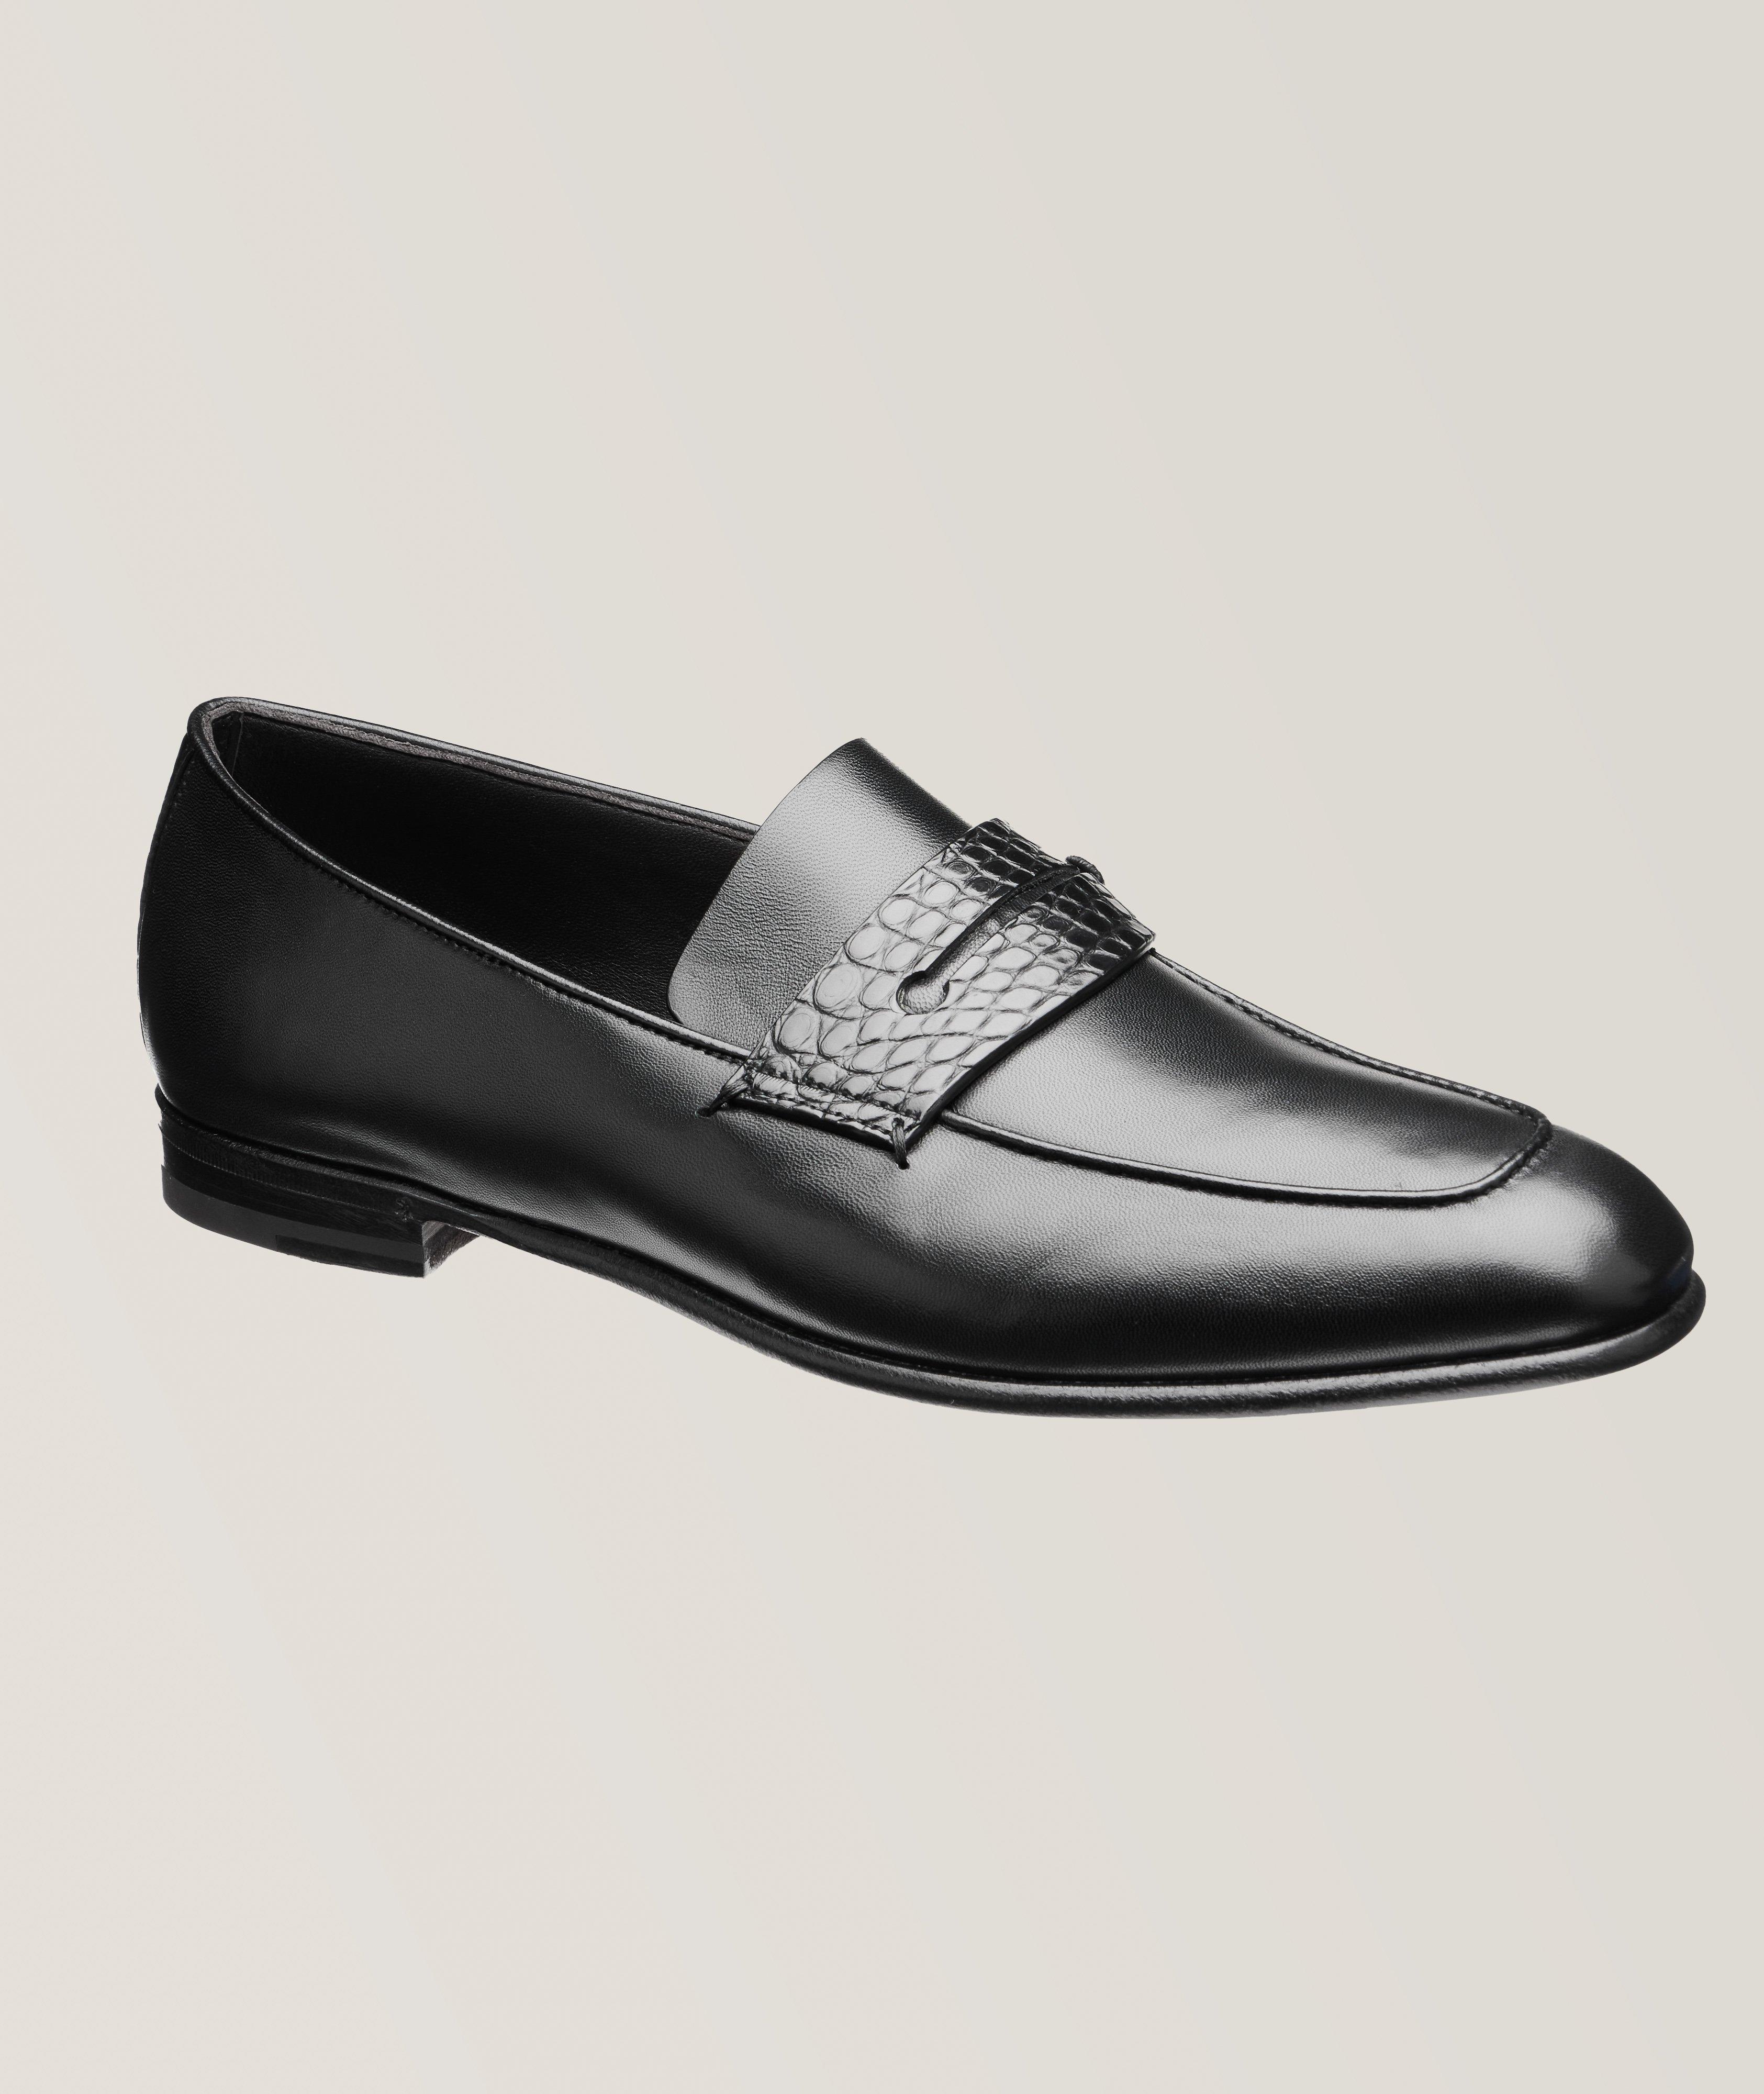 Zegna L'Asola Penny Loafers